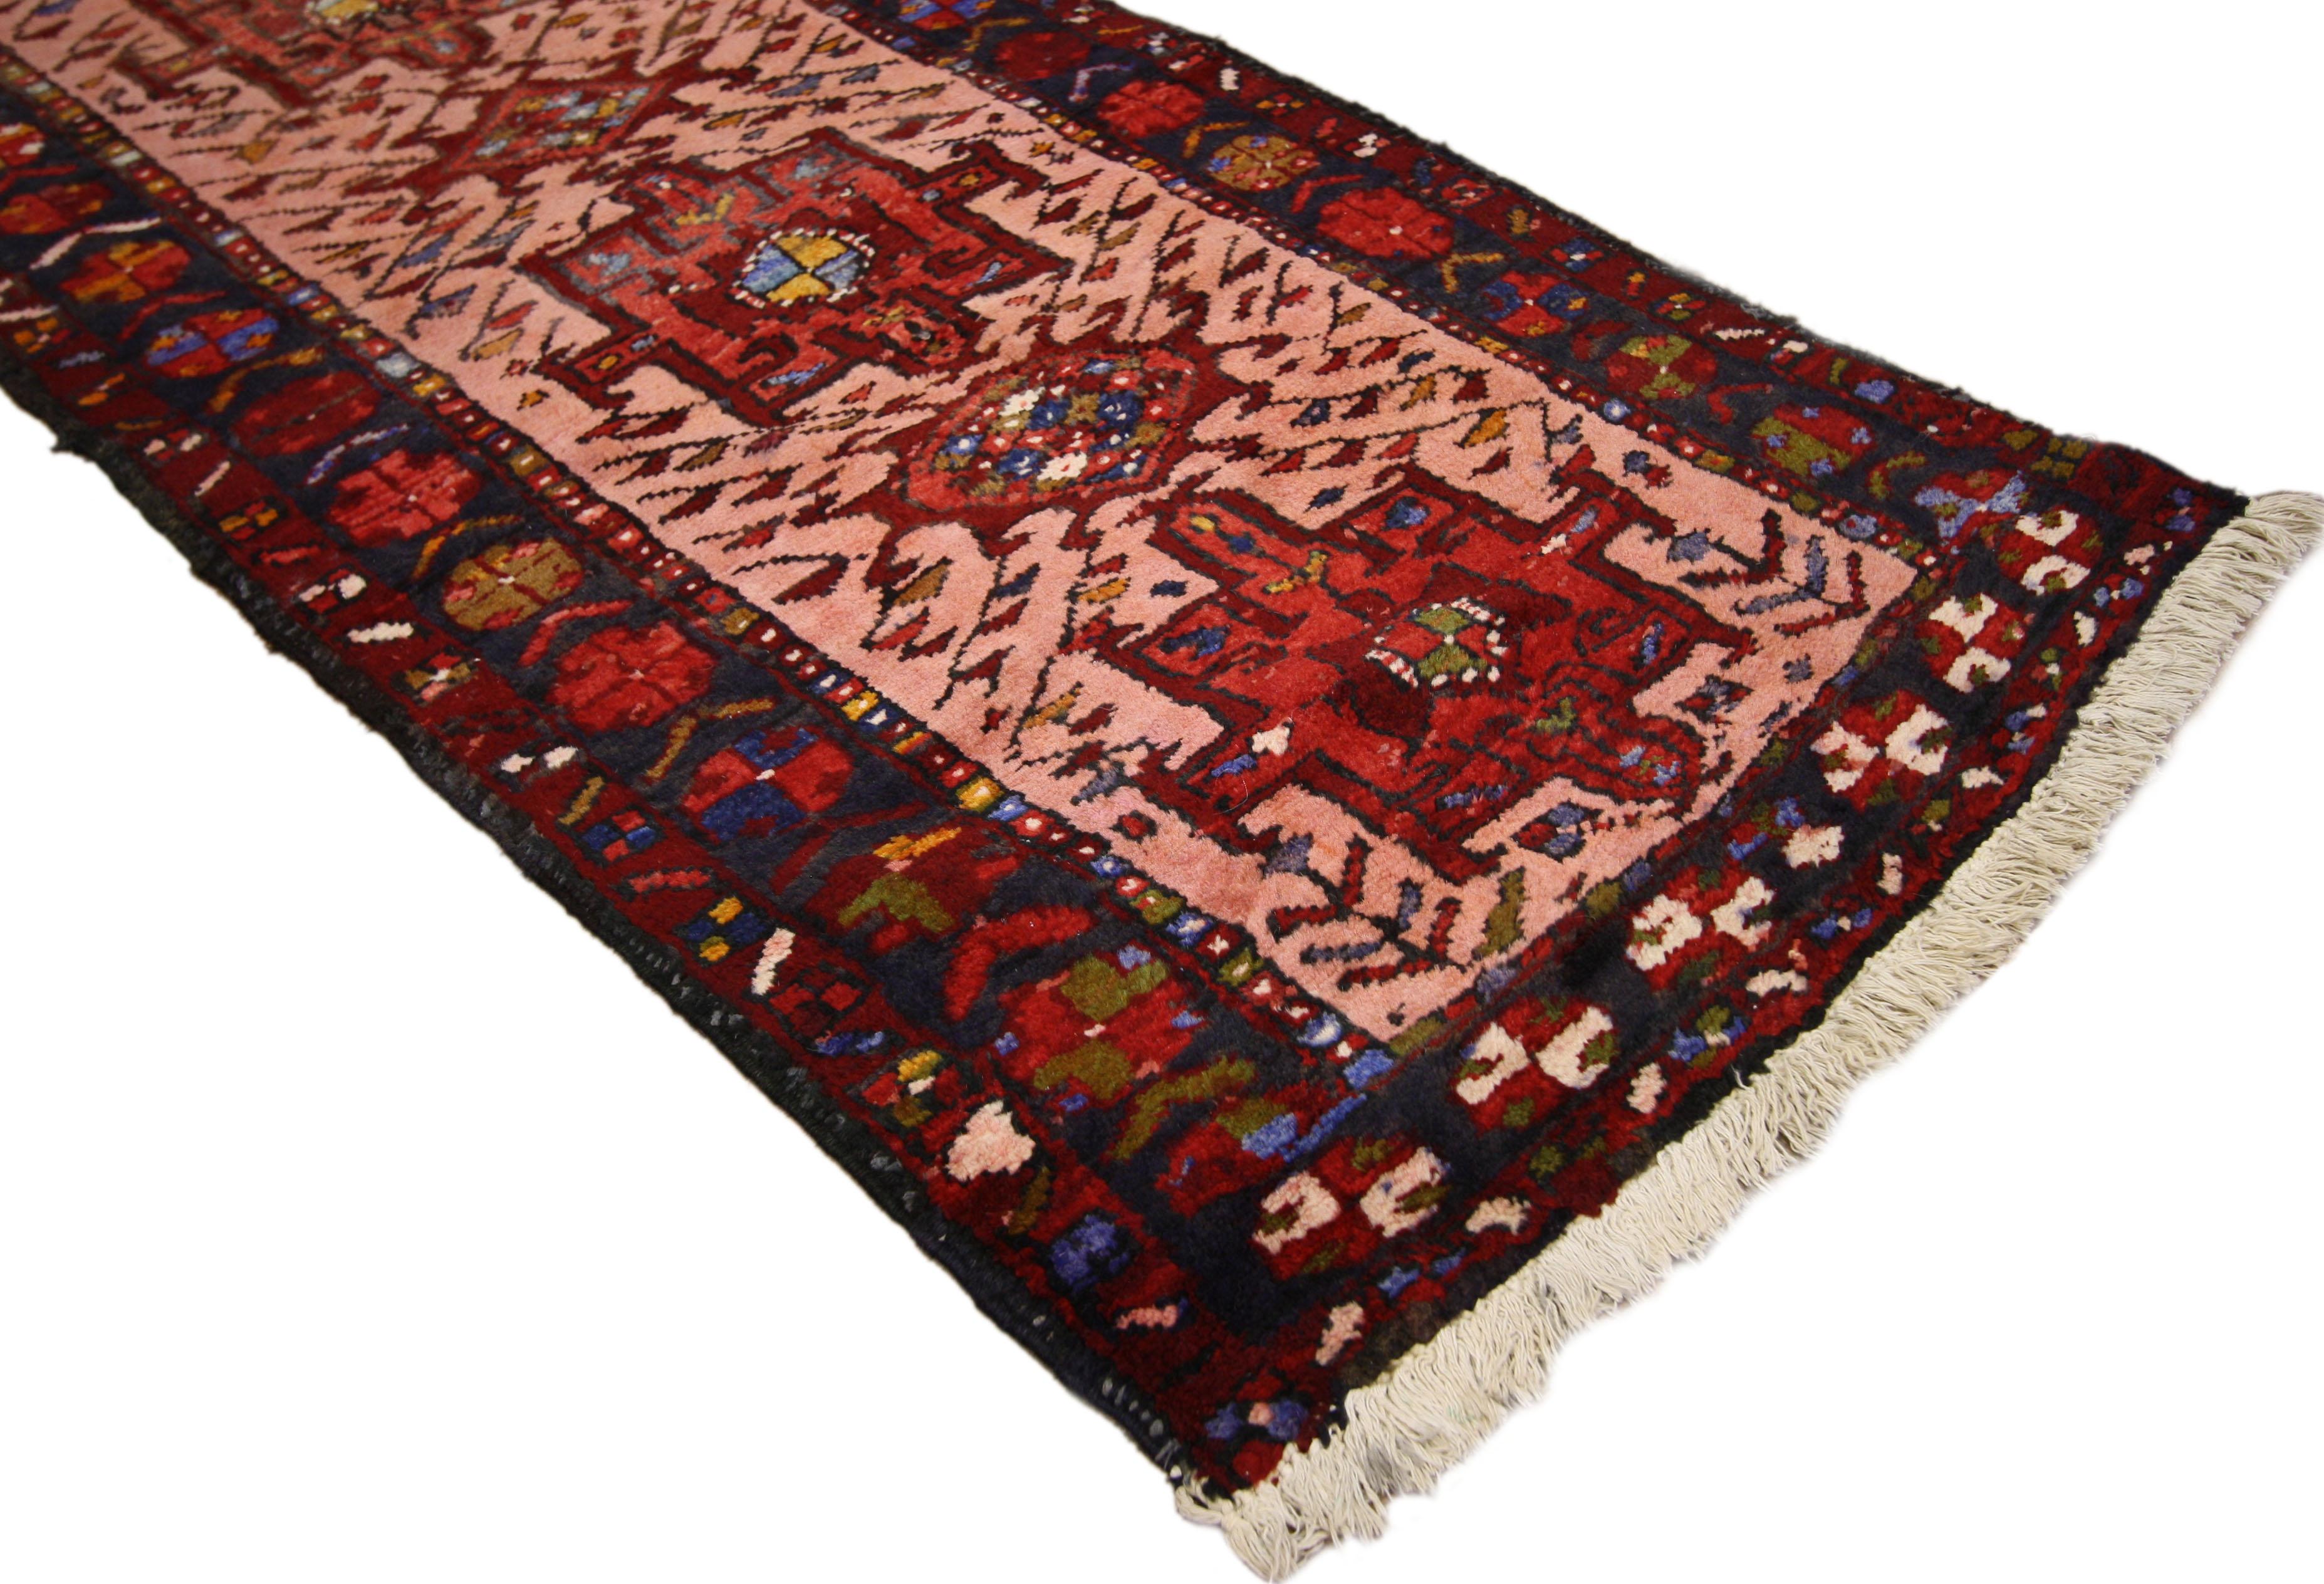 60203 Vintage Persian Heriz Runner with Jacobean Style, Narrow Hallway Runner. Hand-knotted wool vintage Persian Heriz carpet runner with Jacobean style featuring alternating geometric and amulet medallions in an abrashed field surrounded with